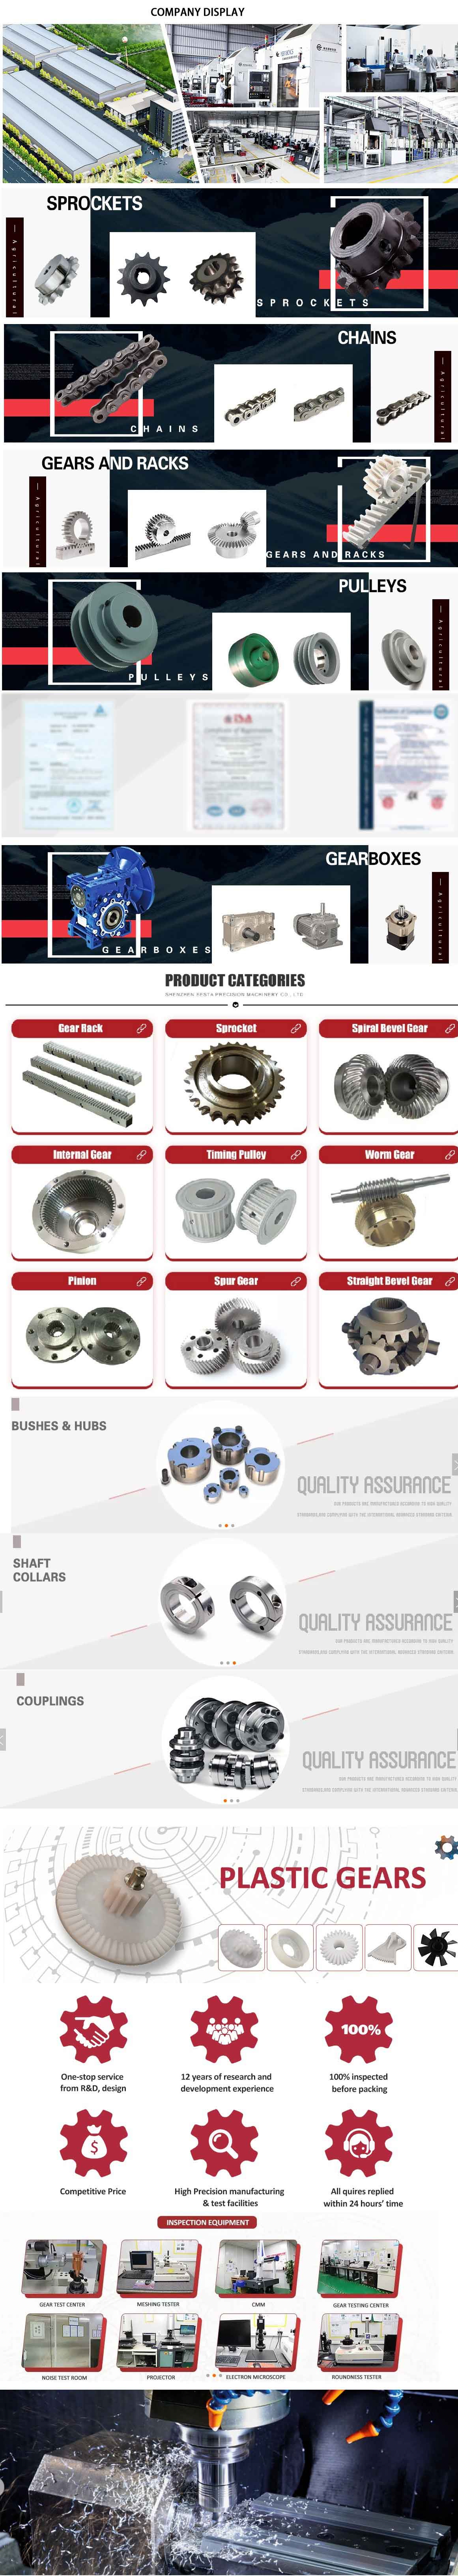 Best  made in China - replacement parts - agricultural gearbox manufacturer in China Quality   bush hog sq720 gearbox   Surat India   Industrial Transmission Chain ISO 9001 Certified Roller Chain 12b 1 with ce certificate prime good quality lower cost appropriate for Tractor, Agricultural machines, right angle pto shaft drive 